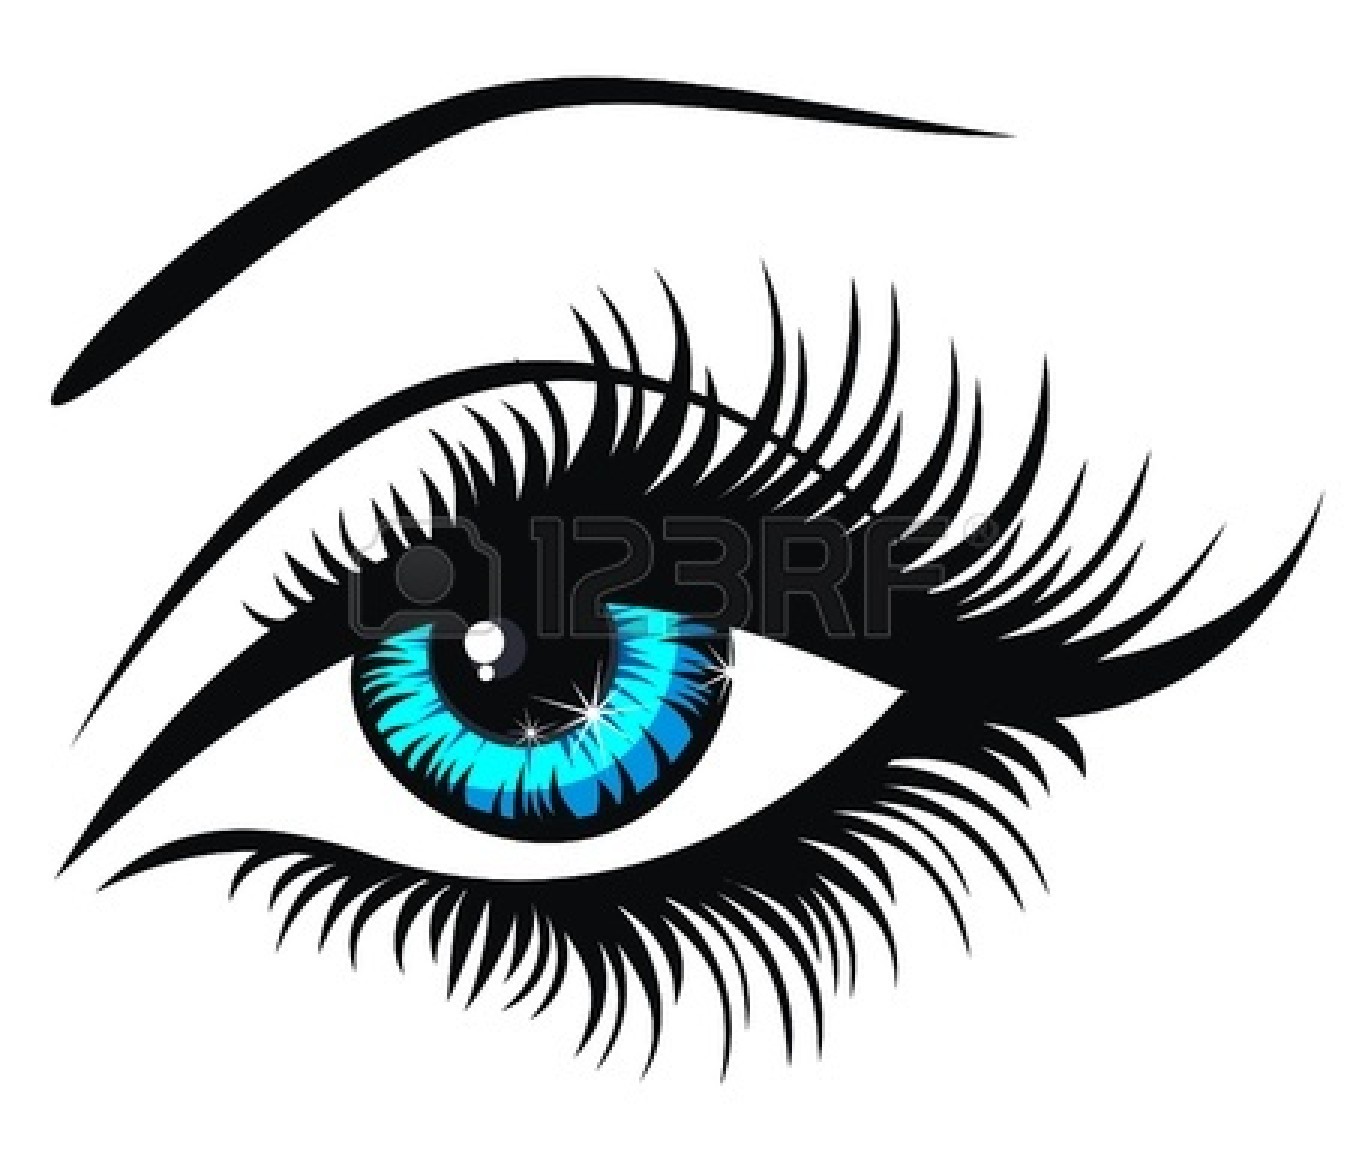 two eyes clipart black and white